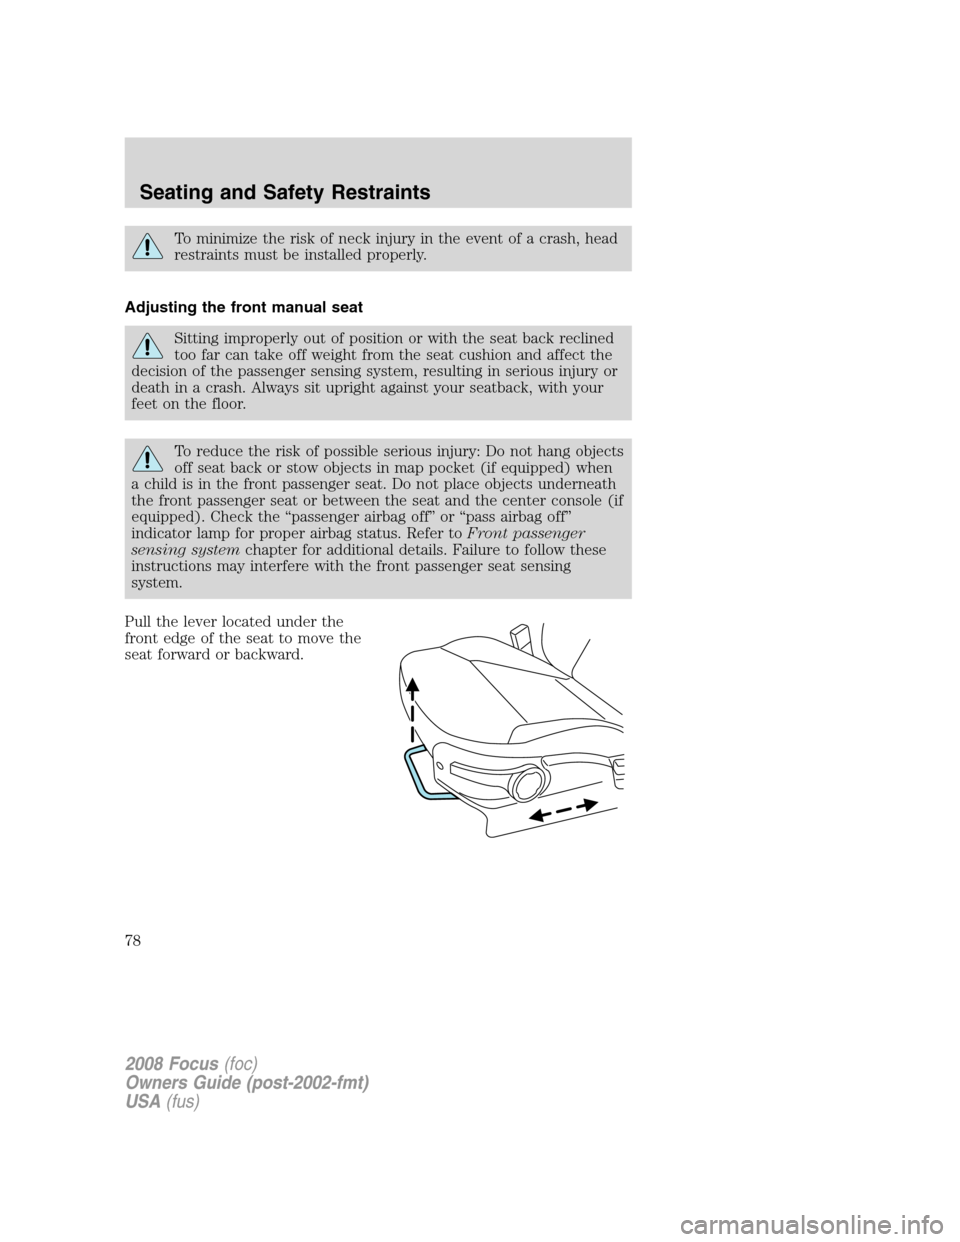 FORD FOCUS 2008 2.G Manual PDF To minimize the risk of neck injury in the event of a crash, head
restraints must be installed properly.
Adjusting the front manual seat
Sitting improperly out of position or with the seat back reclin